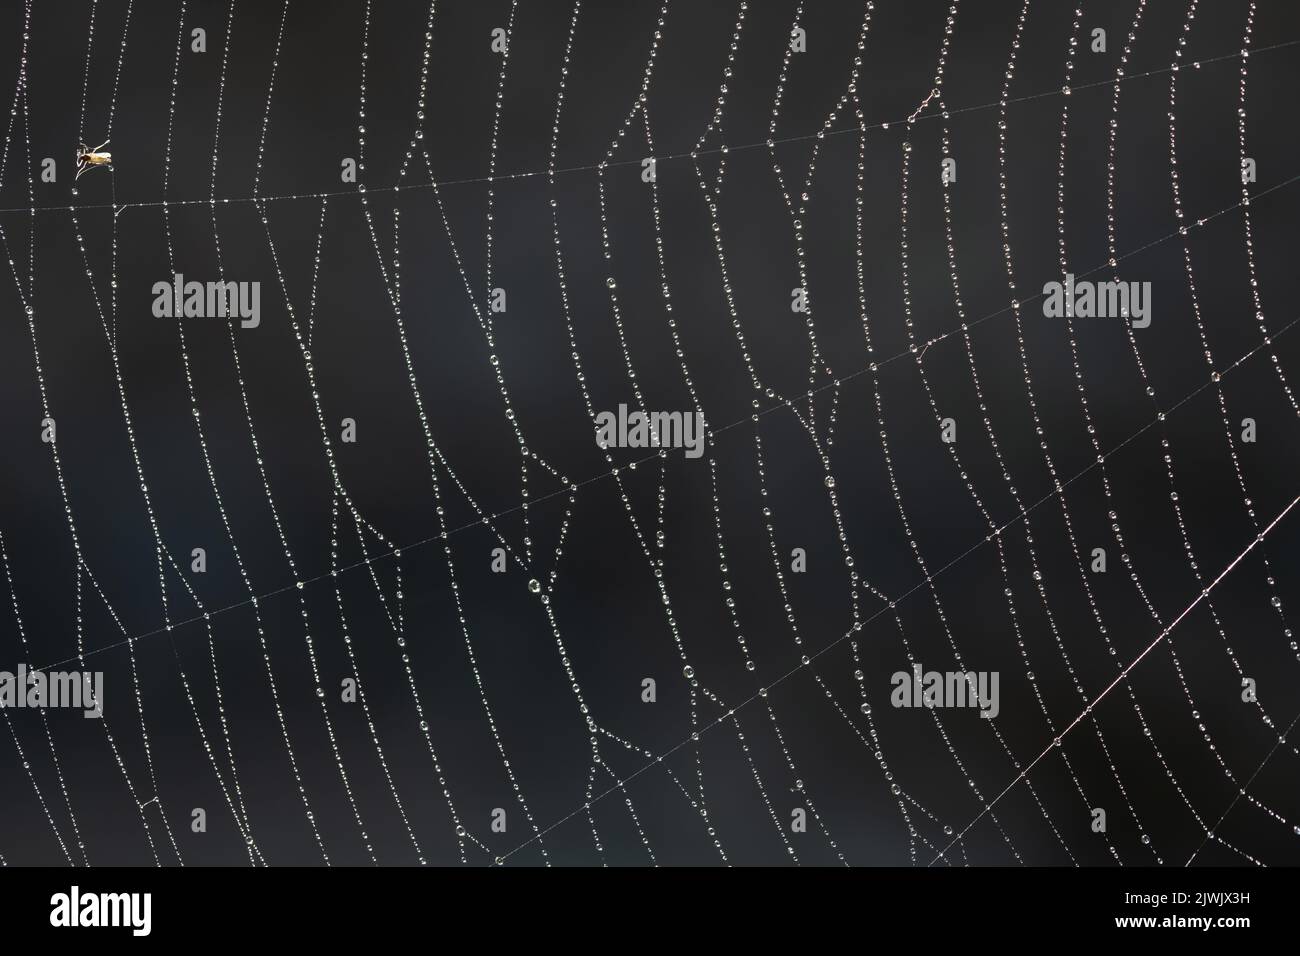 Texture and background of a spider web with small drops of water hanging from it against a dark background. A small insect got caught in it on the edg Stock Photo